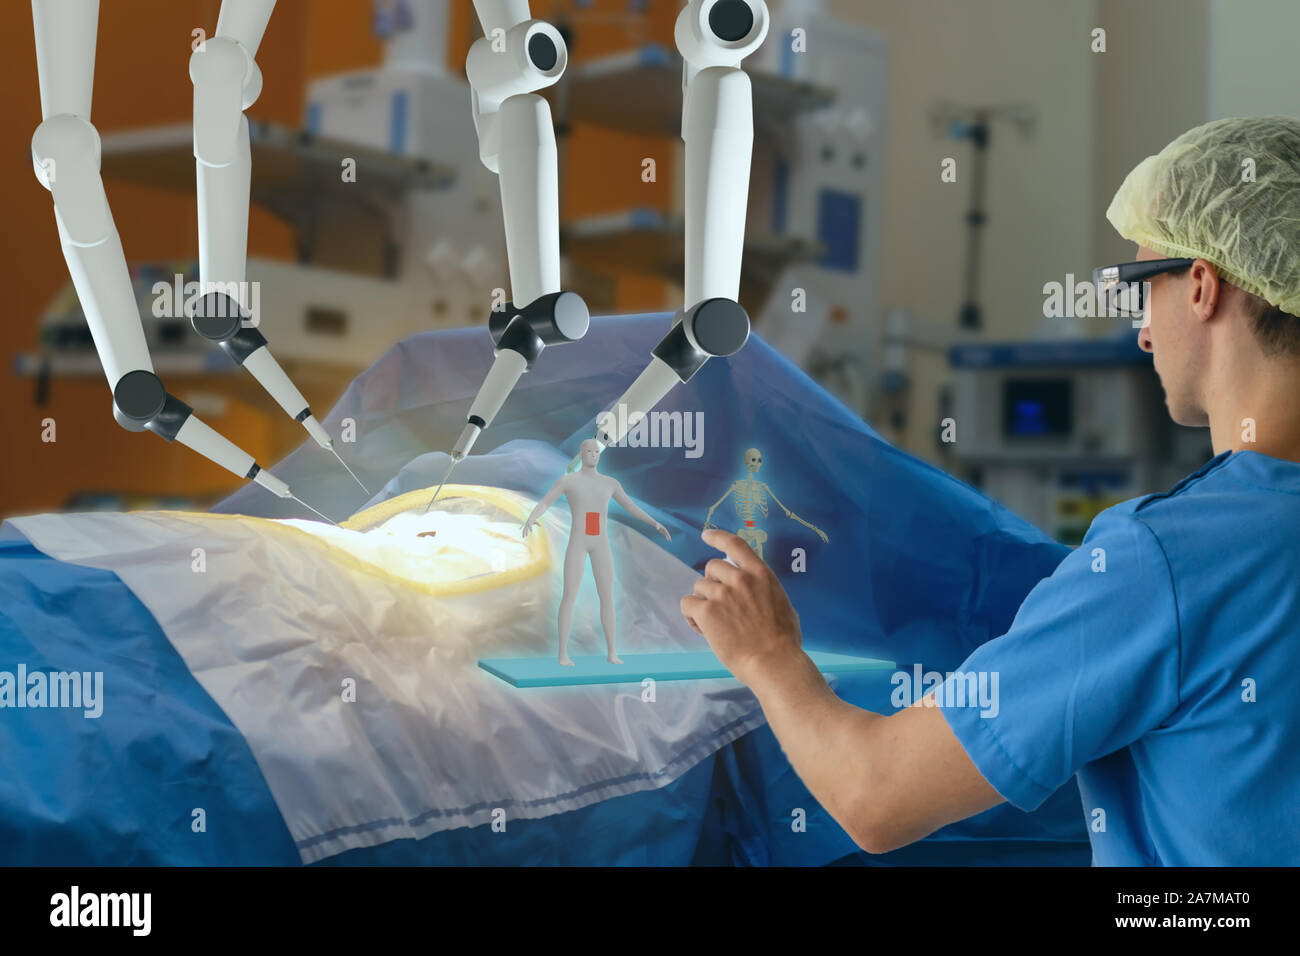 smart medical health care concept with ar vr, surgery robotic machine use allows doctors to perform many types of complex procedures with more precisi Stock Photo